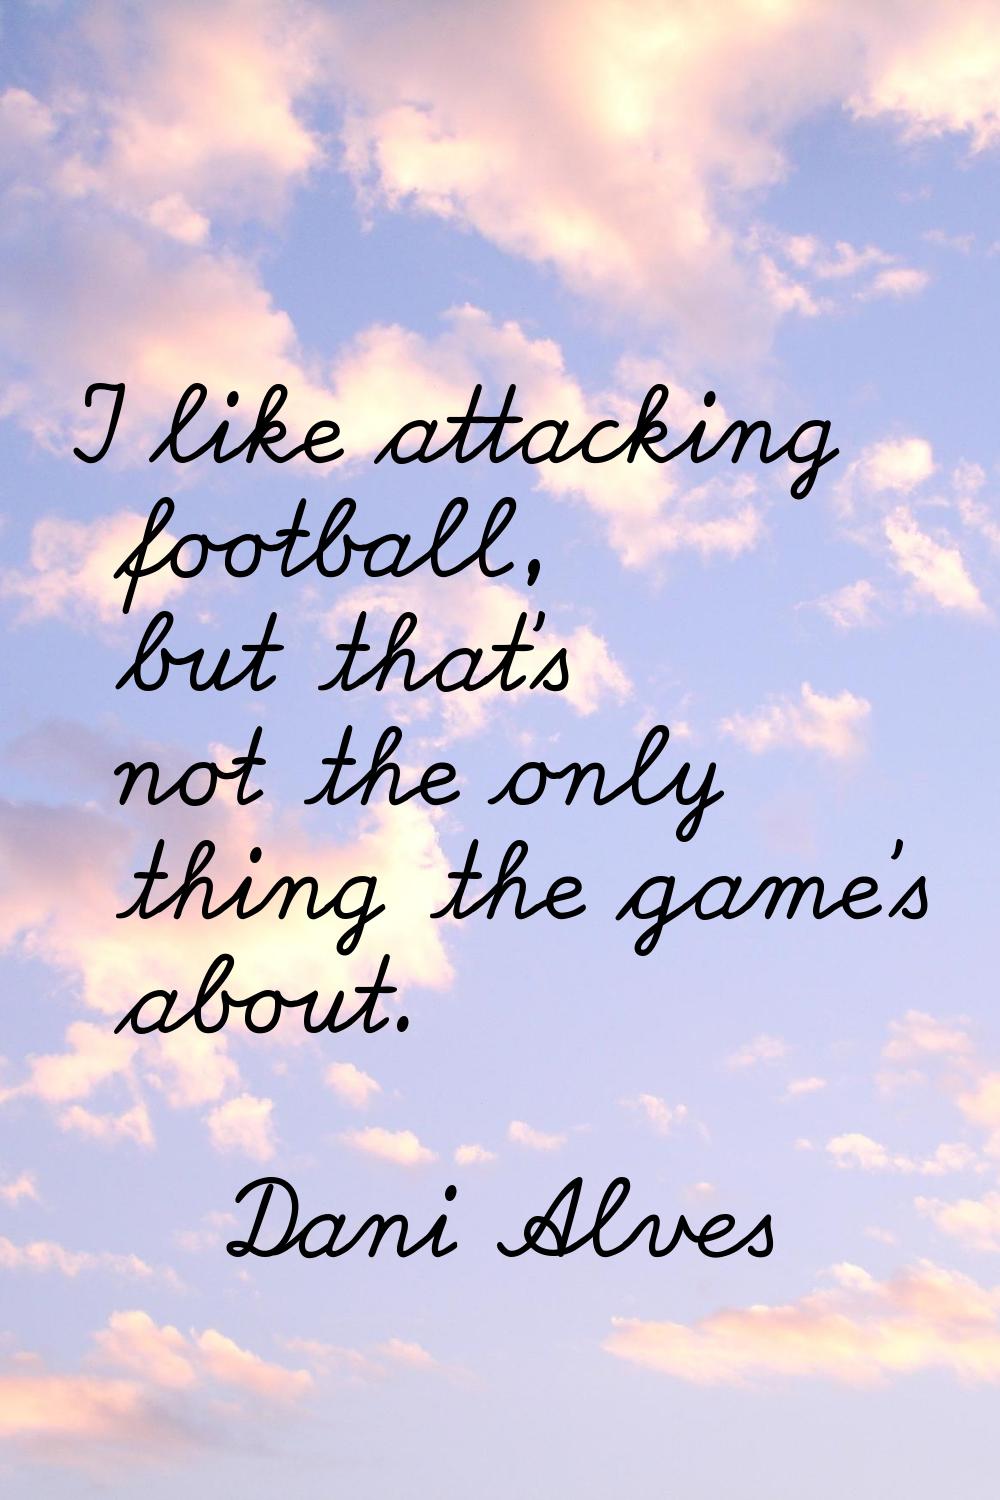 I like attacking football, but that's not the only thing the game's about.